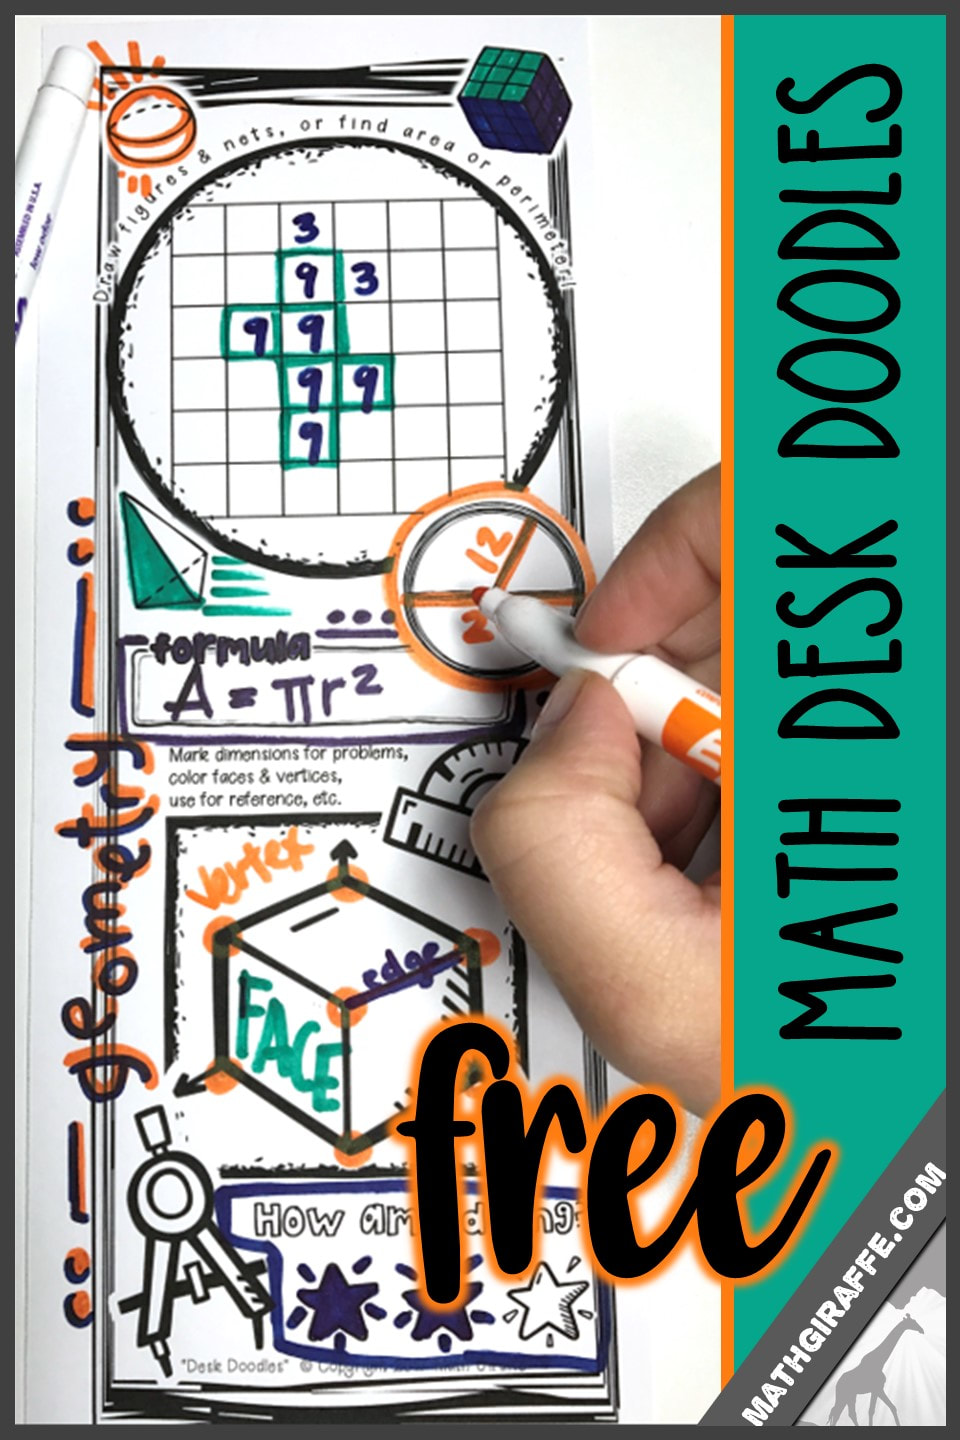 brain-based benefits of doodling in math class